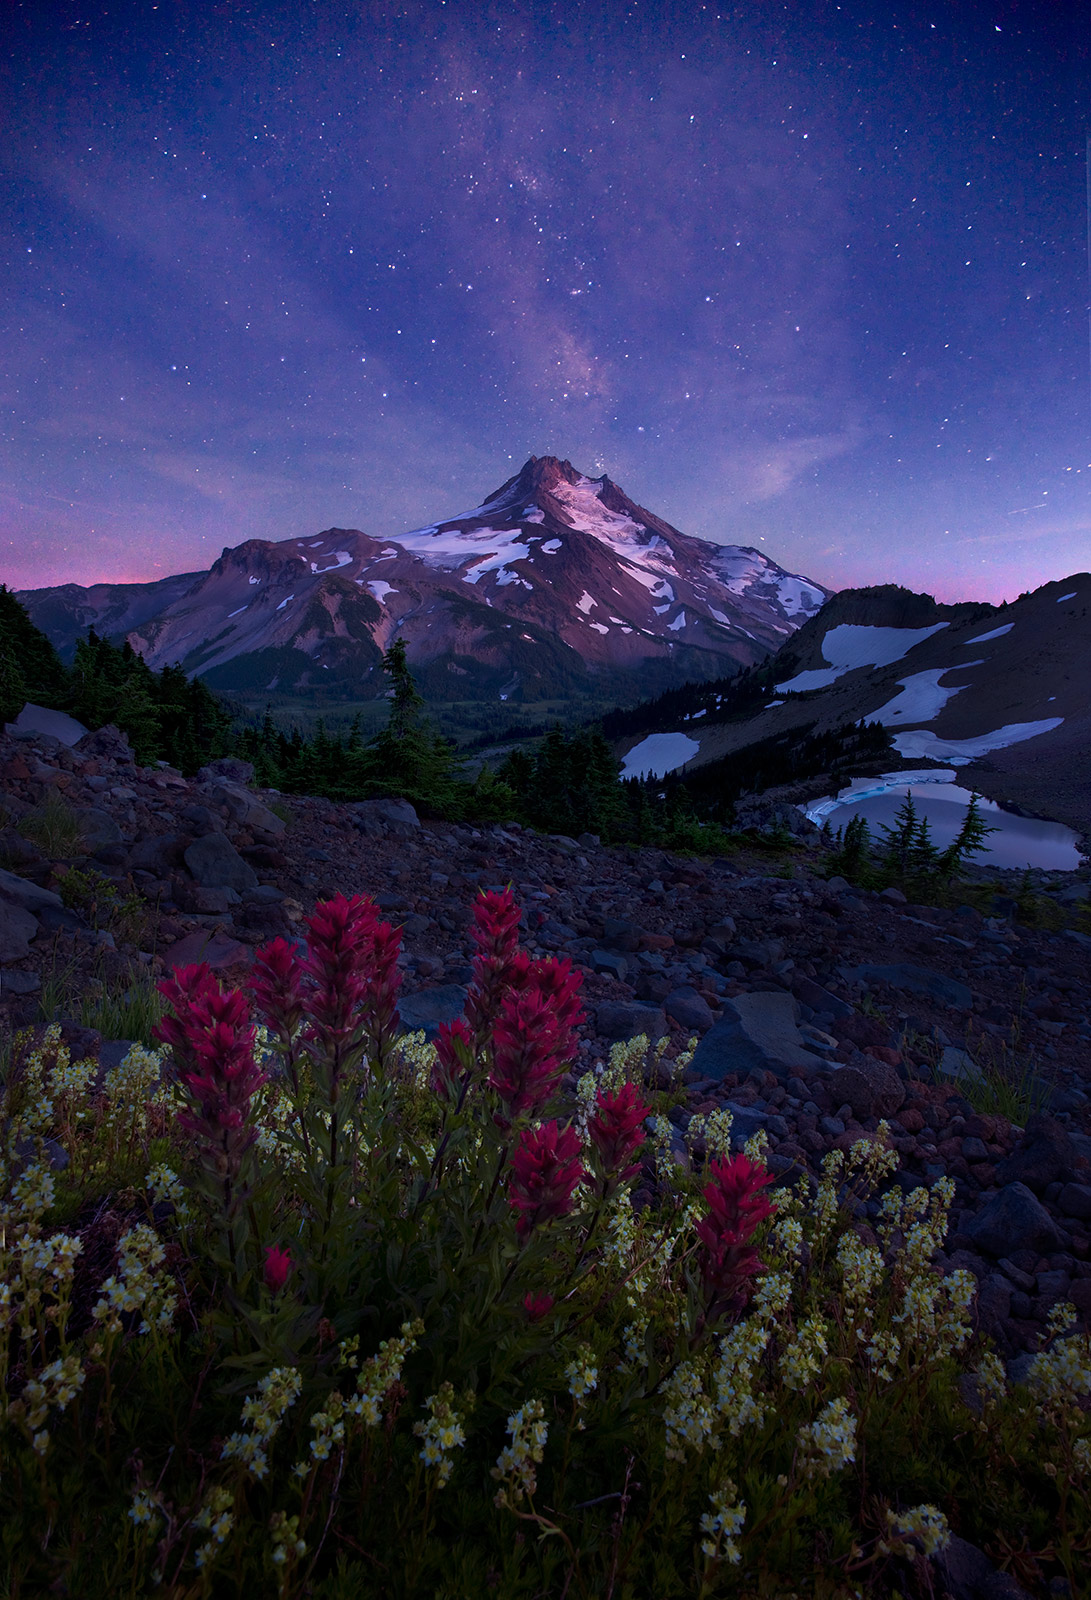 Composite image featuring twilight skies, wildflowers and Oregon's Mount Jefferson. The image was created from three exposures...